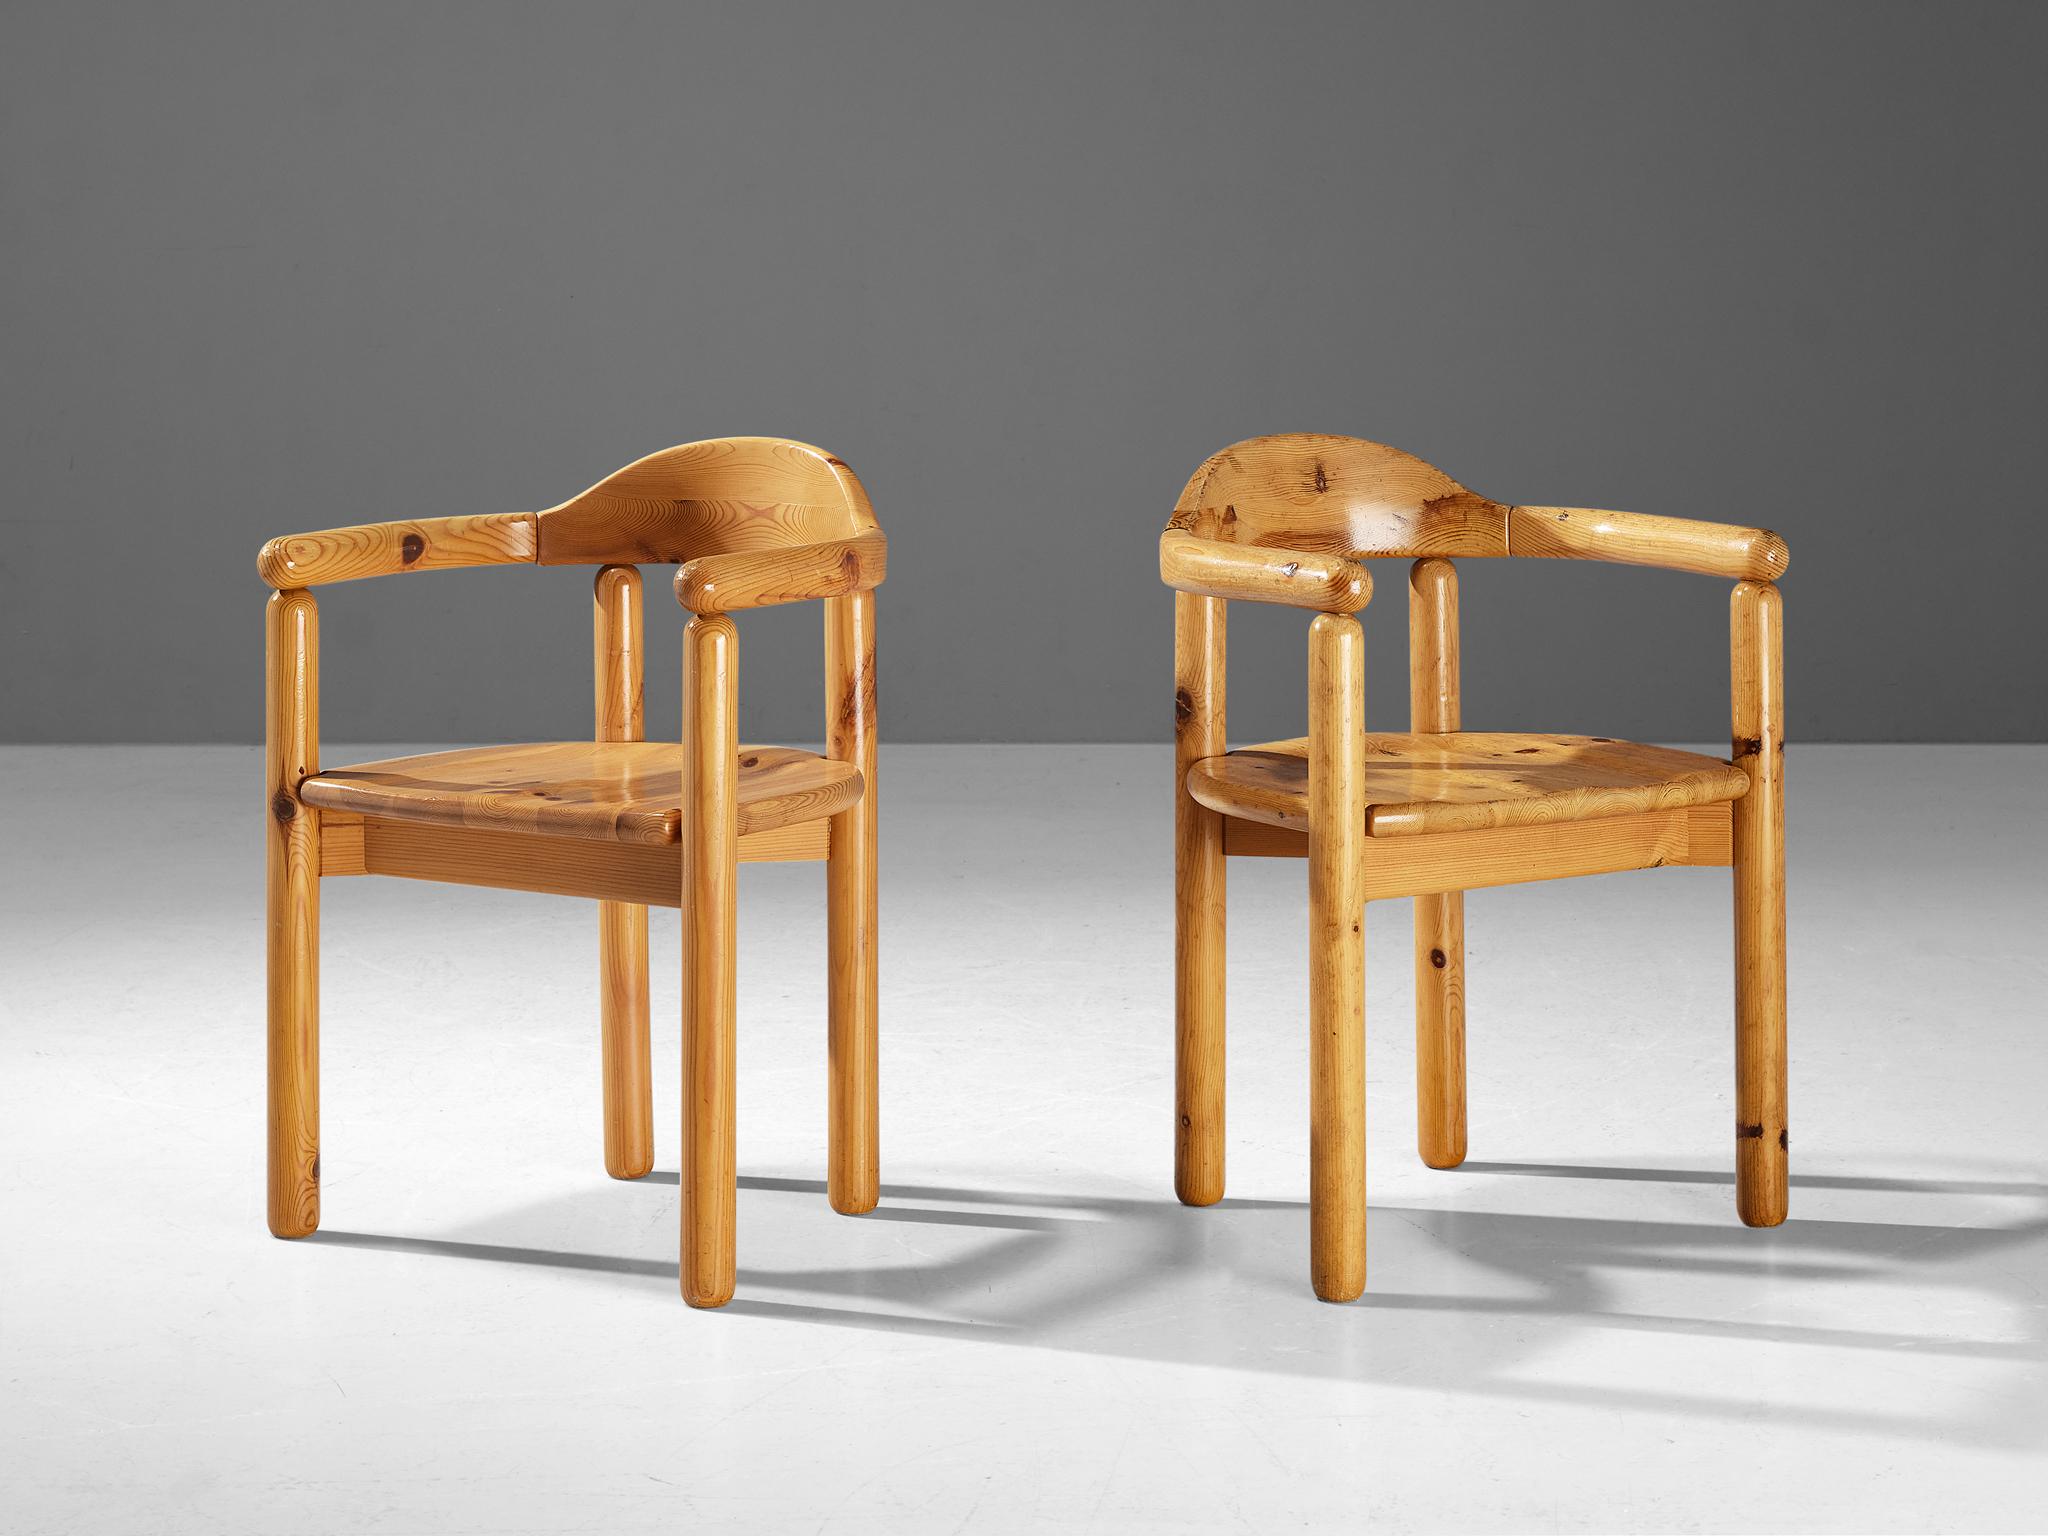 Rainer Daumiller for Hirtshals Sawmill, pair of dining chairs, pine, Denmark, 1970s

Beautiful, organic and natural dining chairs in solid pine. A simplistic design with a round edges and attention for the natural expression and grain of the wood.